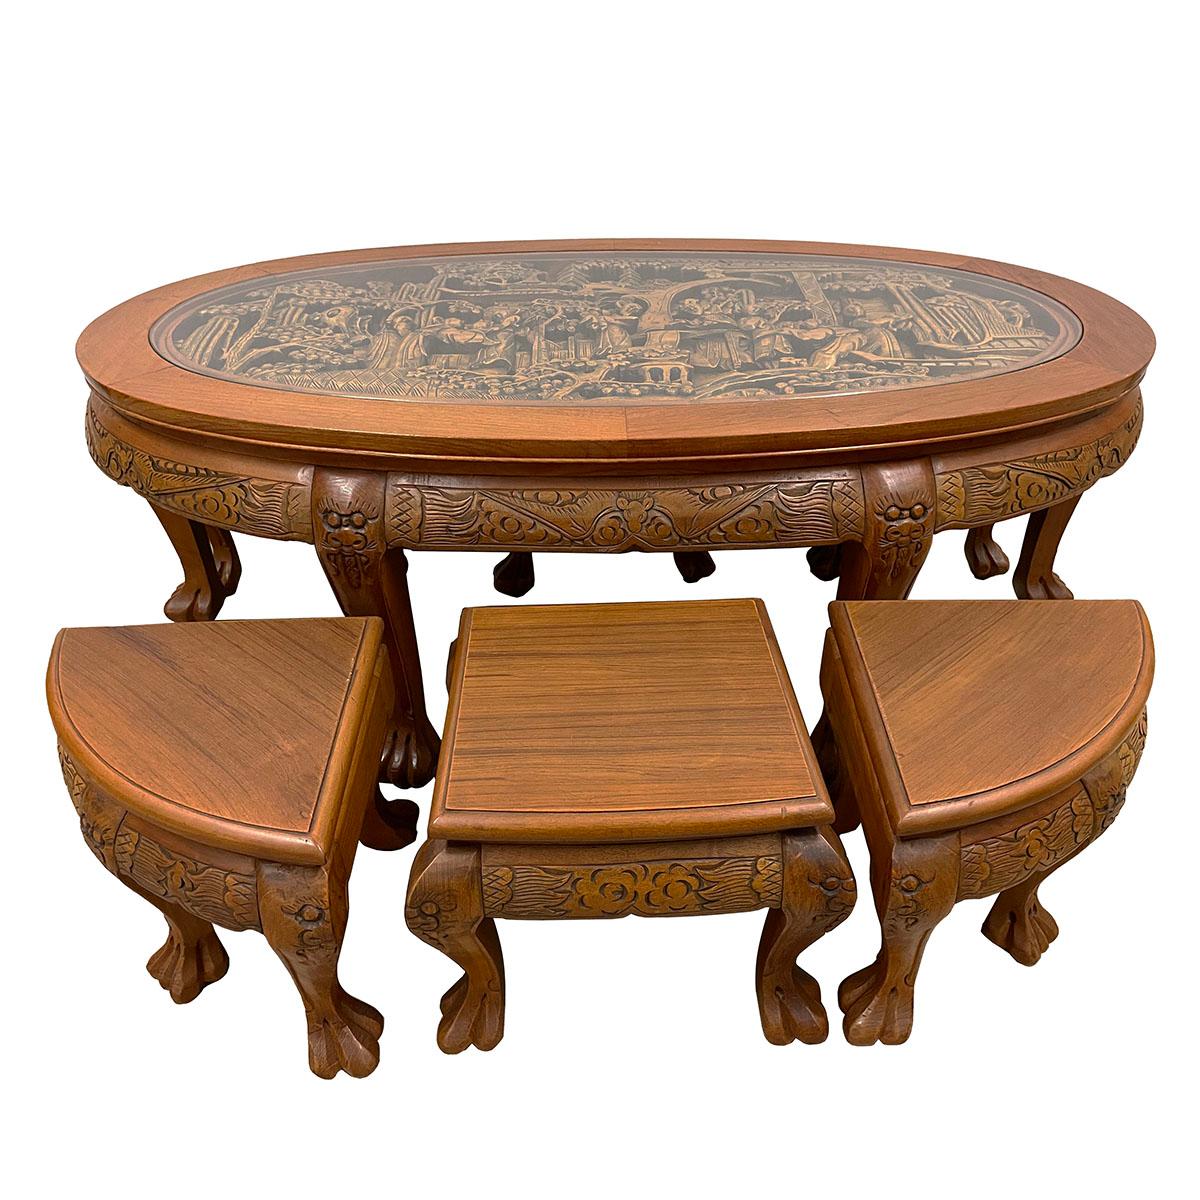 Vintage Chinese Massive Carved Teak Wood Coffee Table with 6 Nesting Stools 1